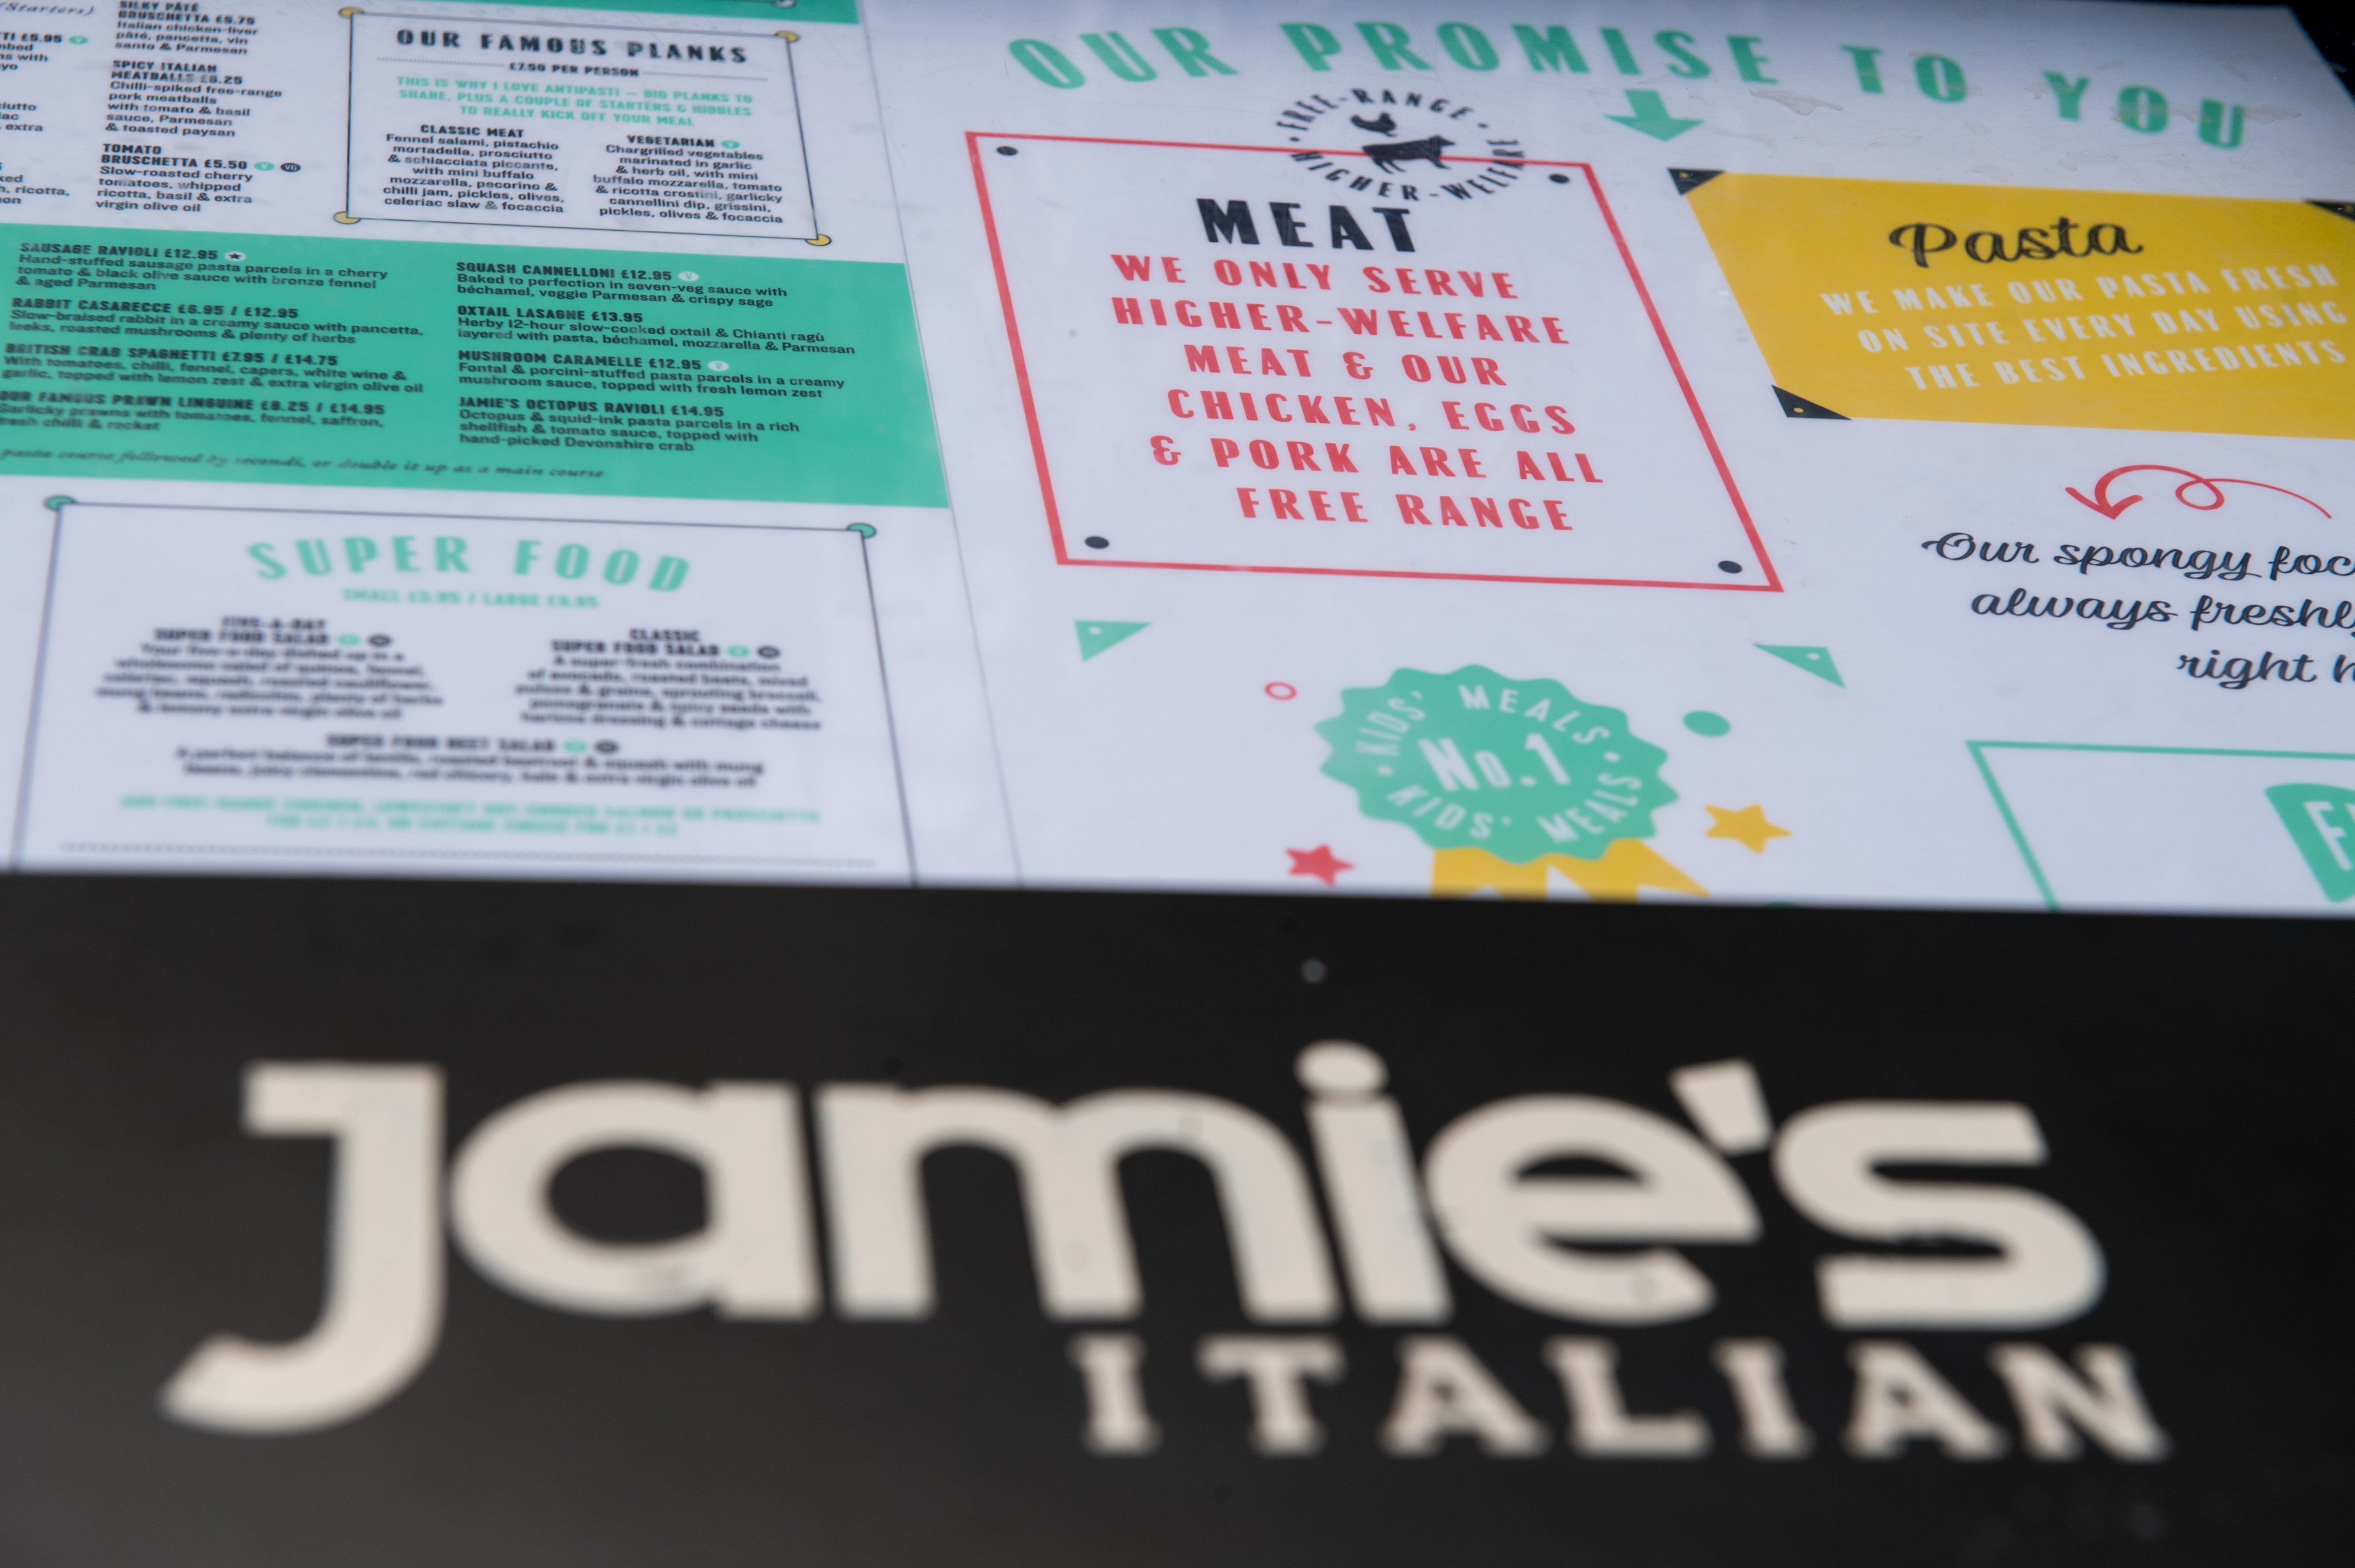 The celebrity TV chef has admitted that the model for Jamie’s Italian was ‘wrong from day one’